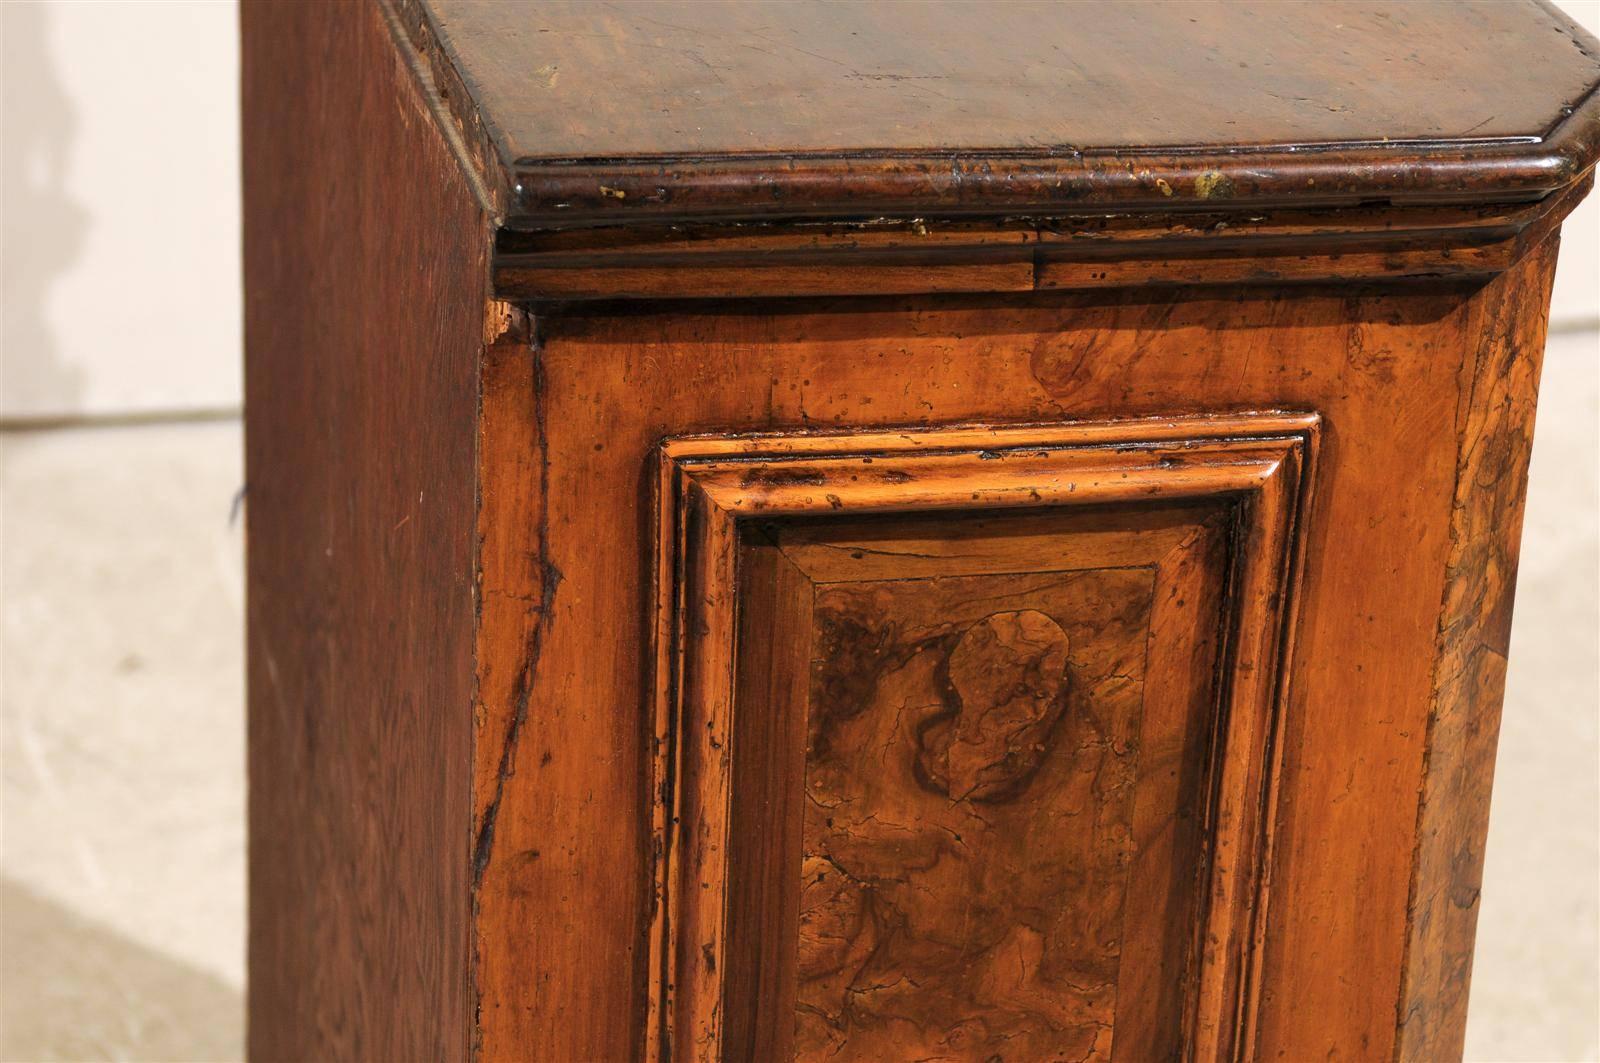 An Italian Early 19th Century Small Shelf Cabinet with Nice Wood Grain Visible 6